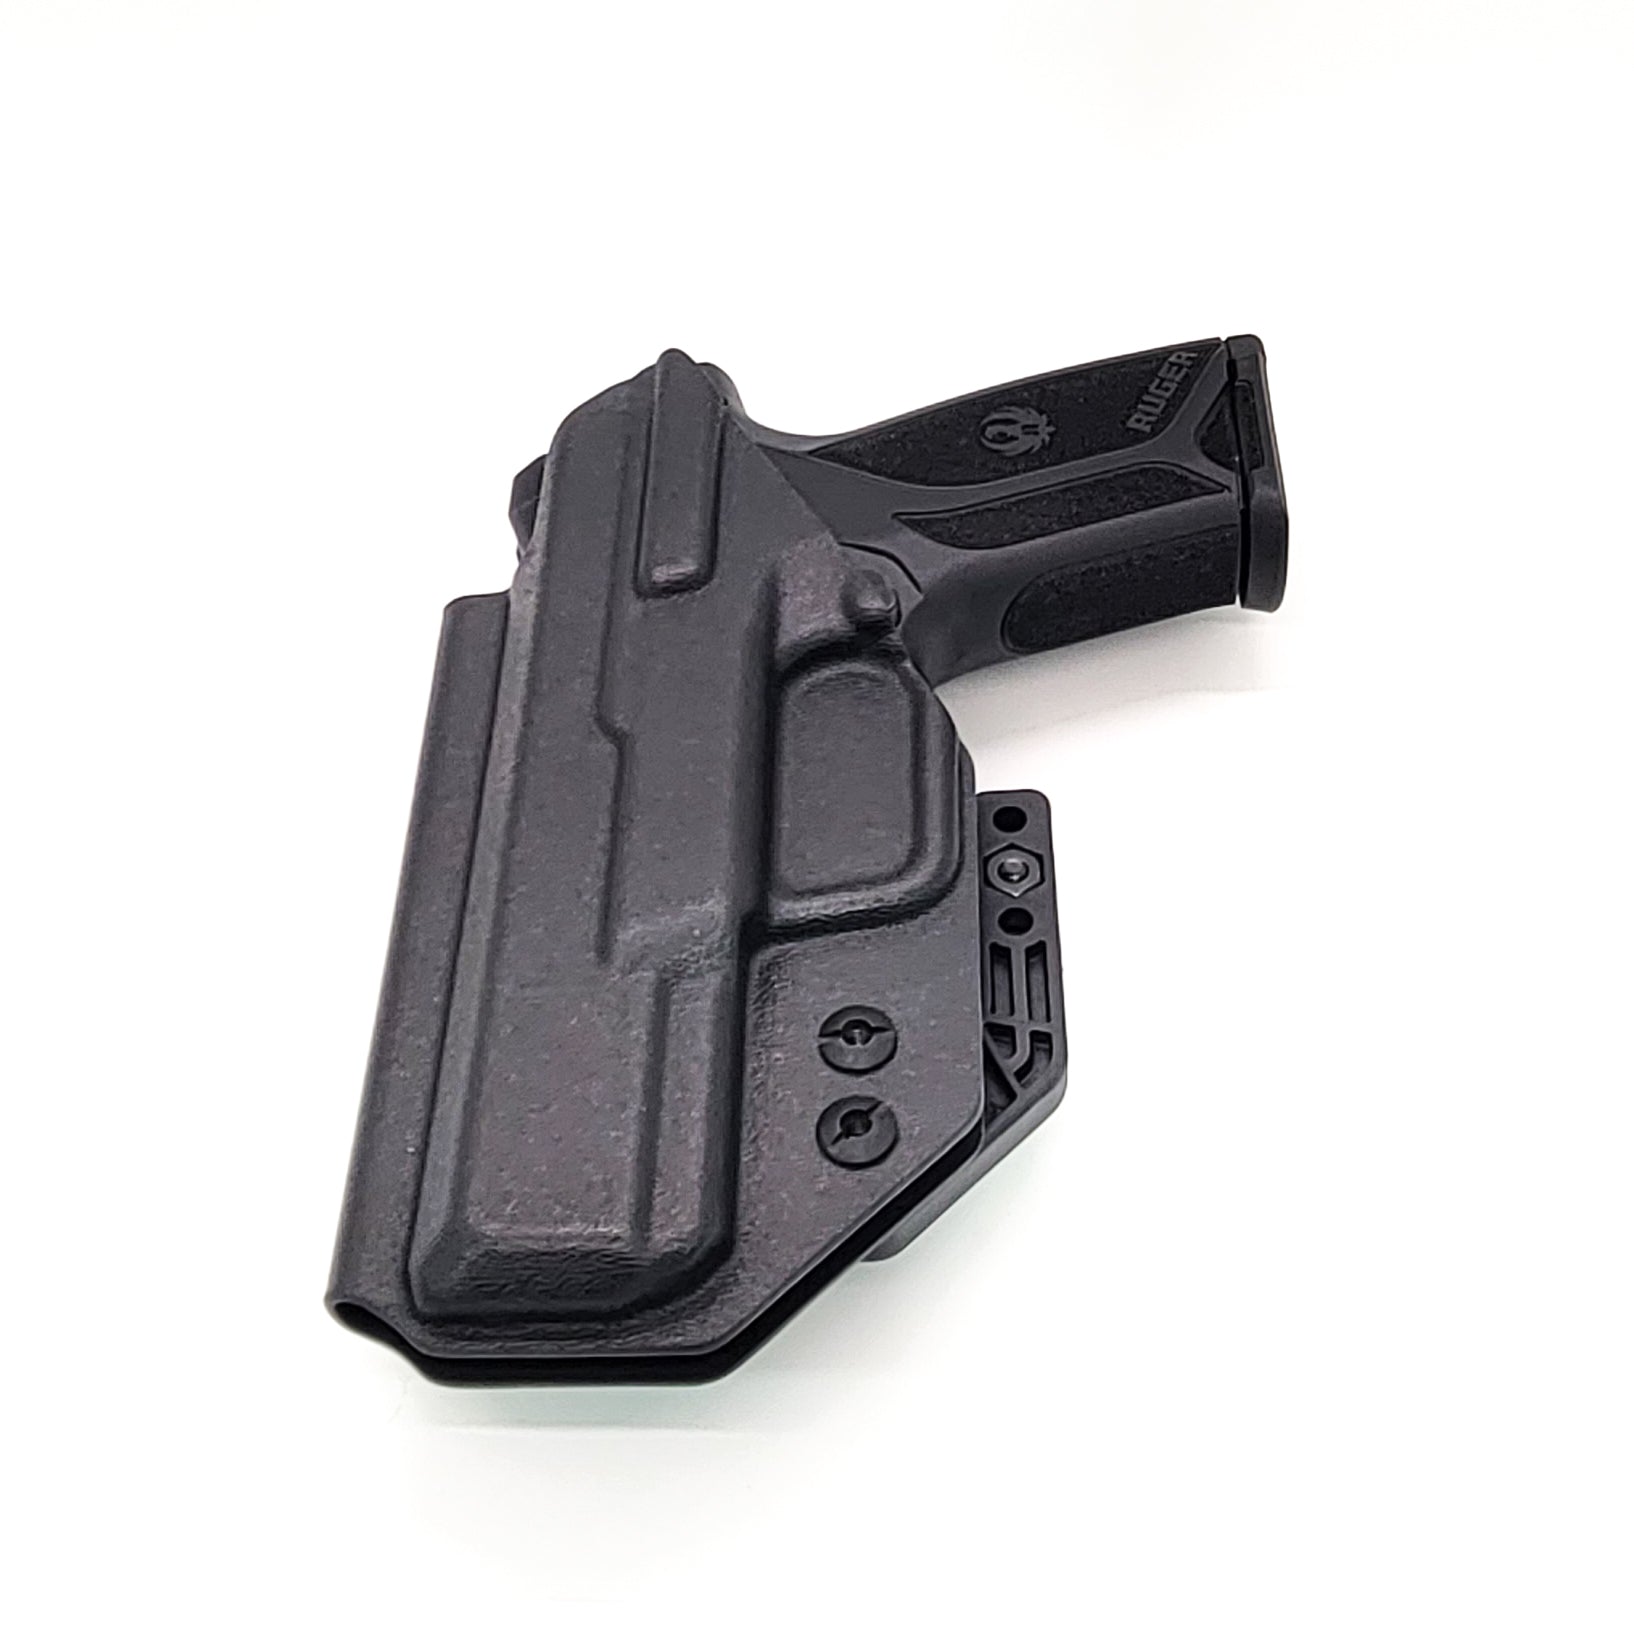 For the best, most comfortable, AIWB, IWB, Kydex Inside Waistband Holster Designed to fit the Ruger Security 9 pistol, shop Four Brothers 4BROS holsters. Adjustable retention, high sweat guard, smooth edges, and minimal material for improved comfort and concealment. Made in the USA 